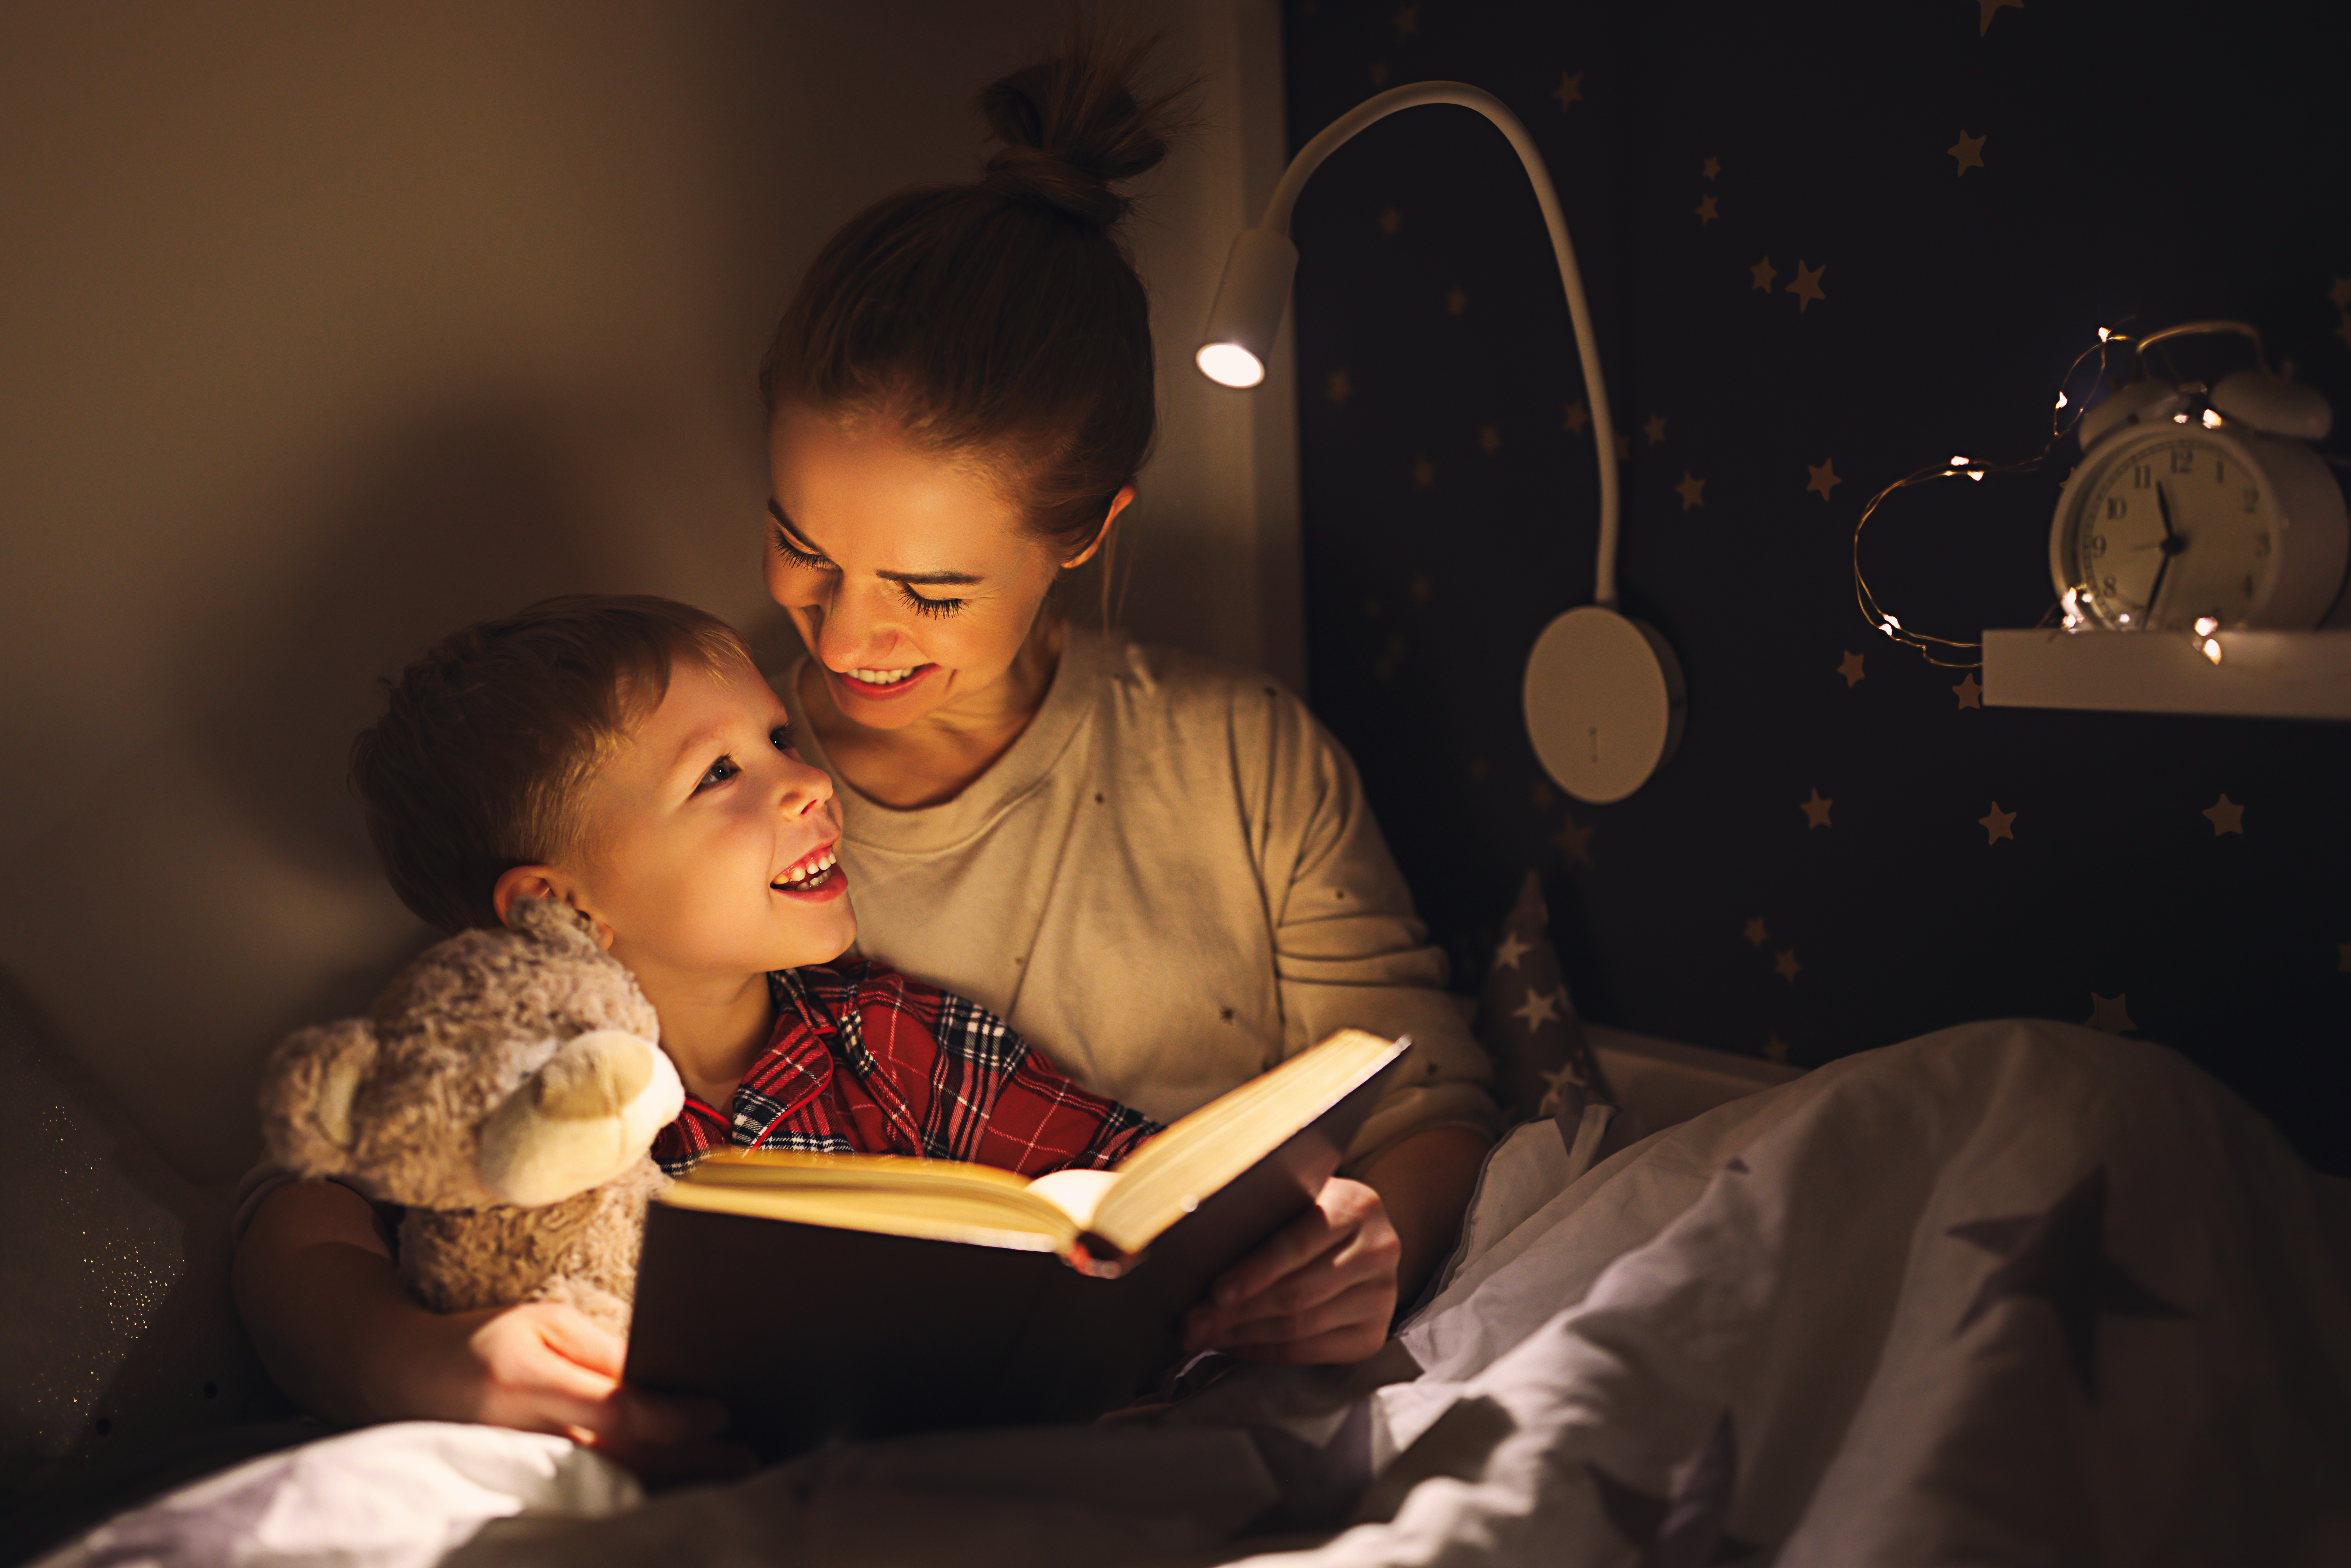 Cheerful mother and son cuddling and reading book | Source: Getty Images